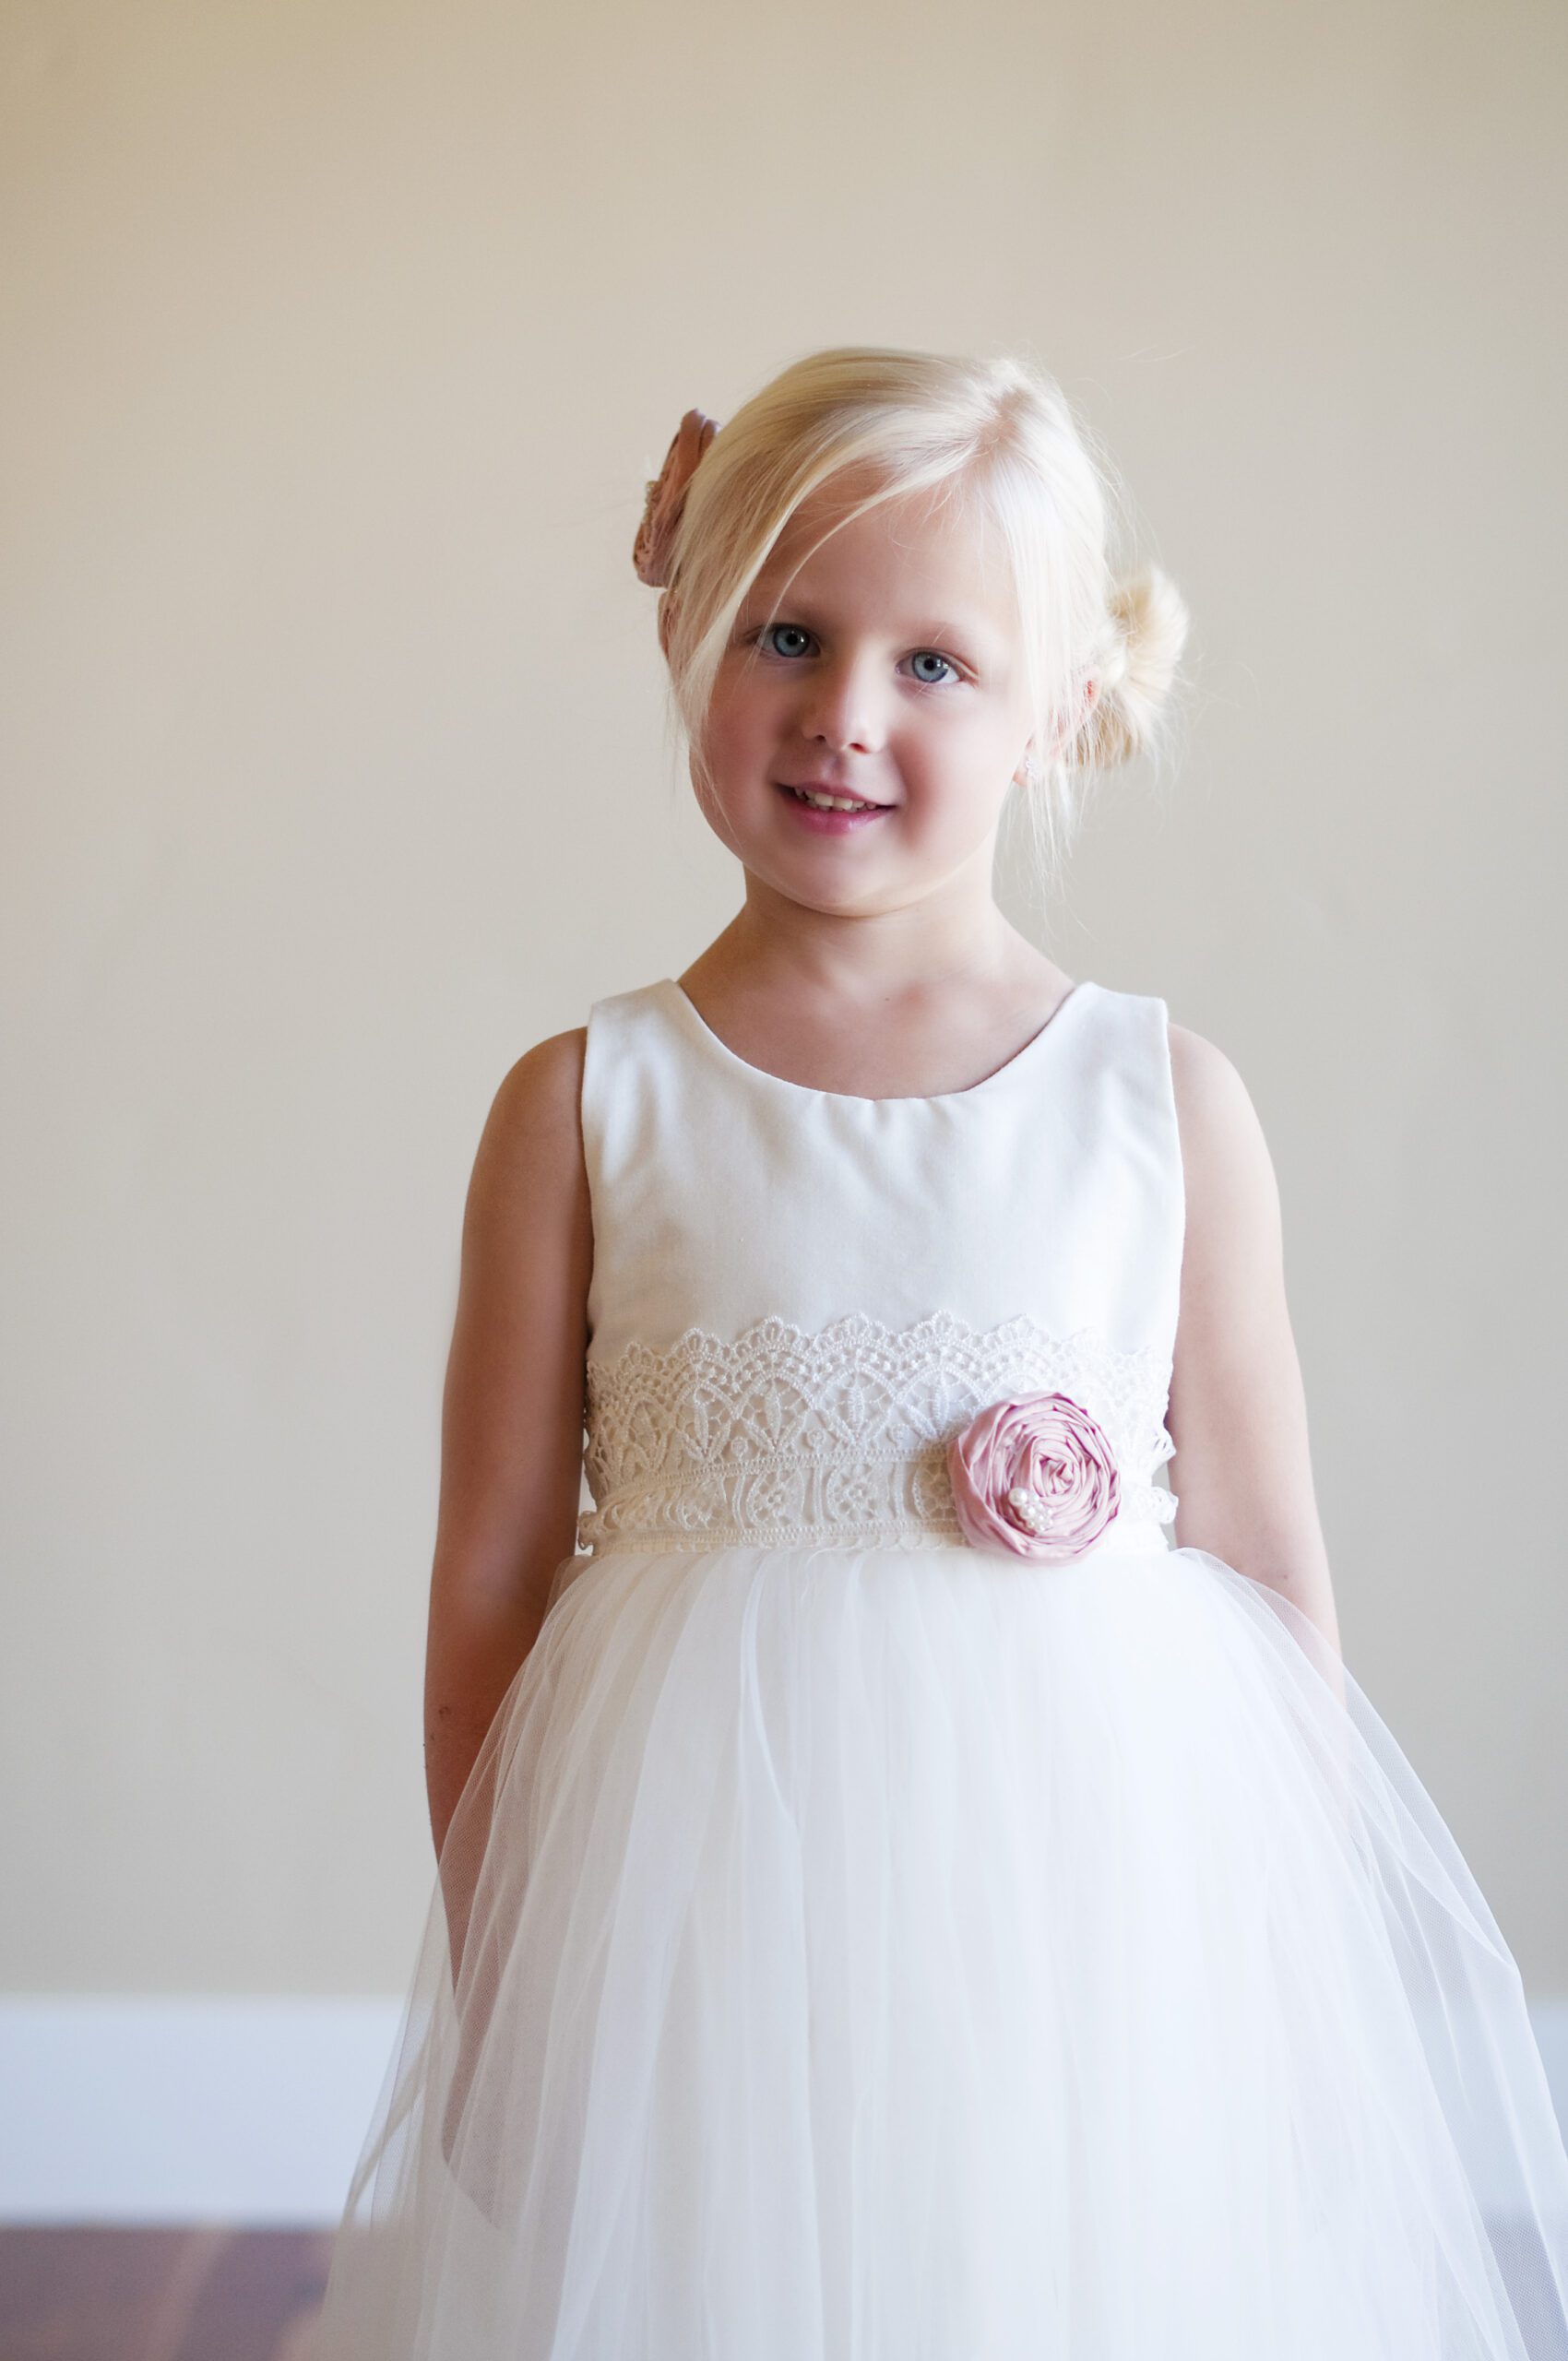 A photo of a young flower girl wearing a white cotton and tulle flower girl dress with a pink silk flower